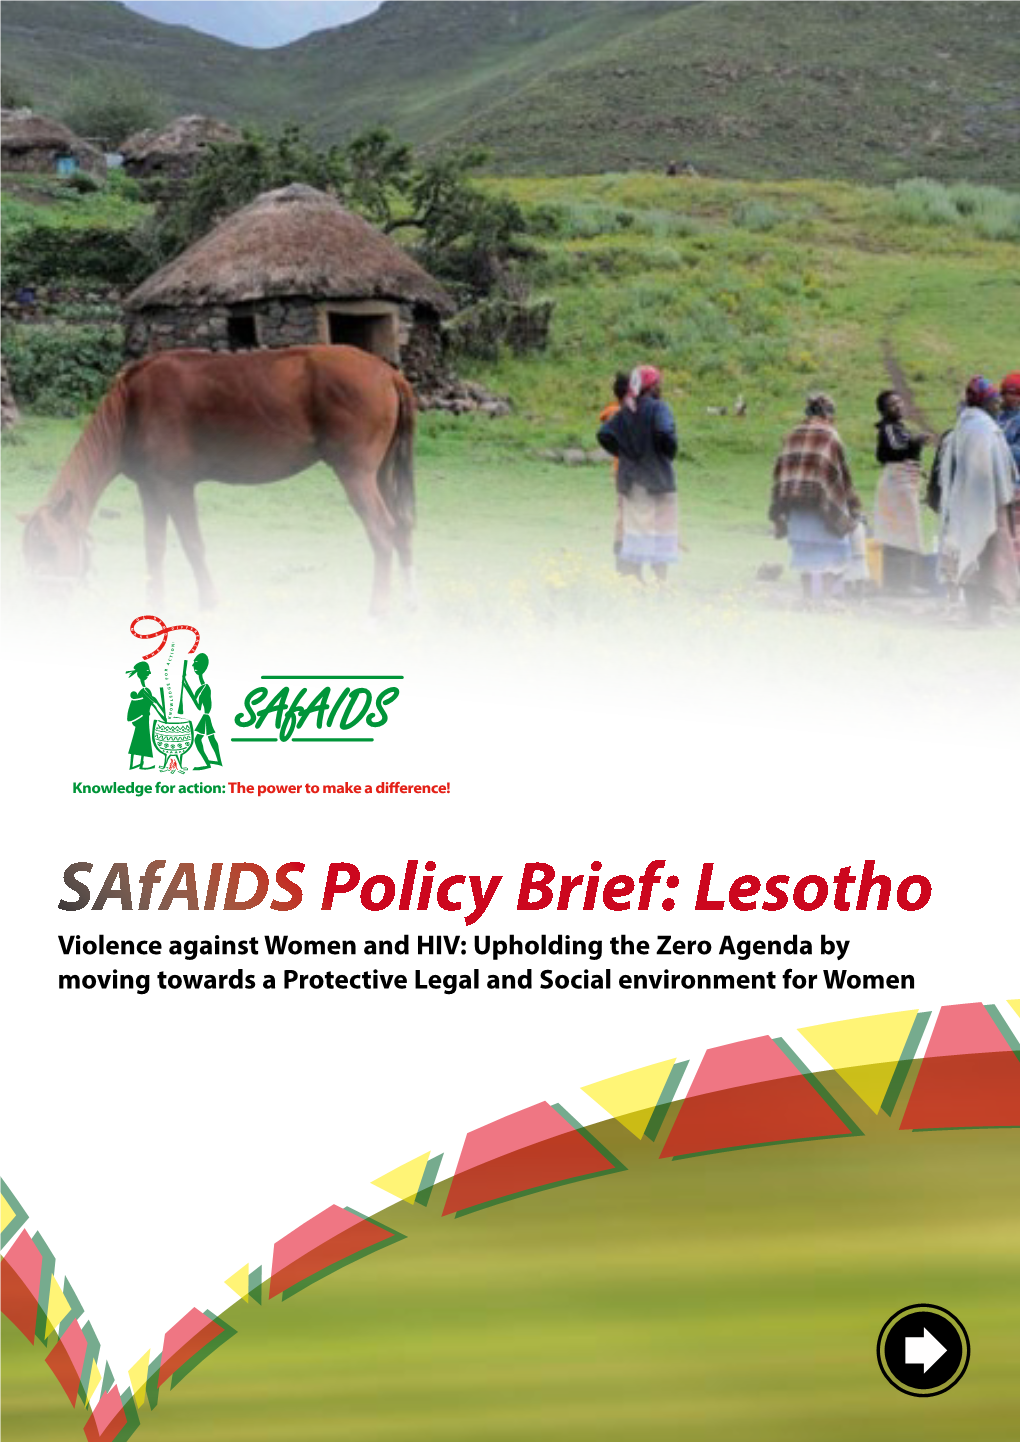 Safaids Policy Brief: Lesotho Violence Against Women and HIV: Upholding the Zero Agenda by Moving Towards a Protective Legal and Social Environment for Women SUMMARY